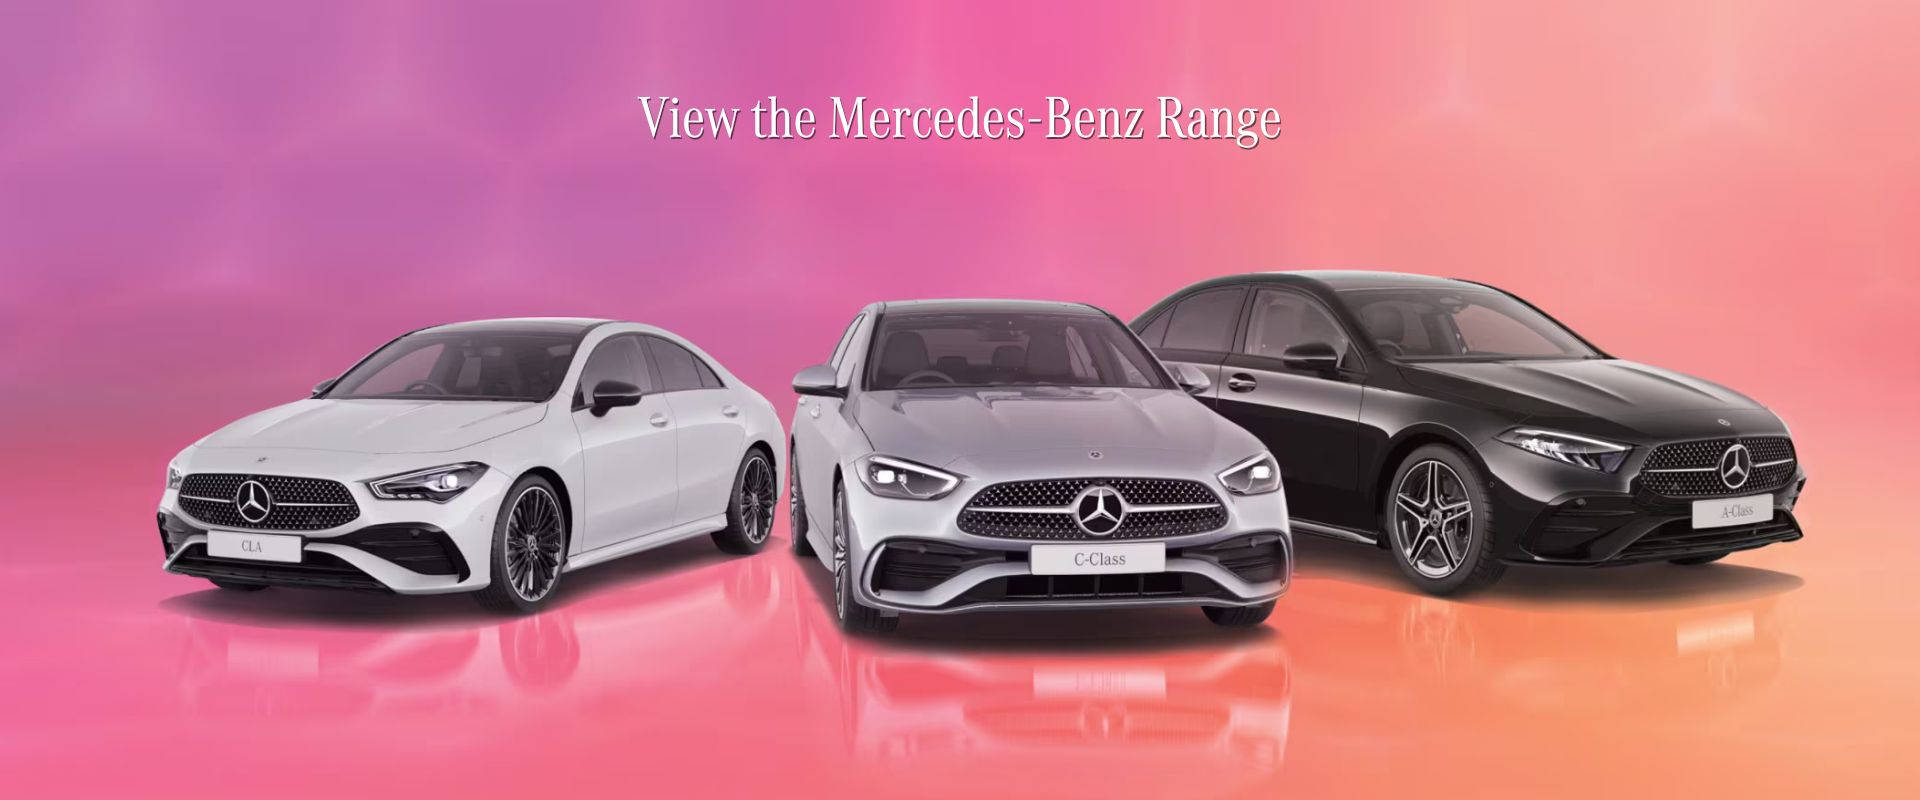 Mercedes-Benz - Accelerate your drive. Save on select Mercedes-AMG models with complimentary registration, CTP and stamp duty, for a limited time.